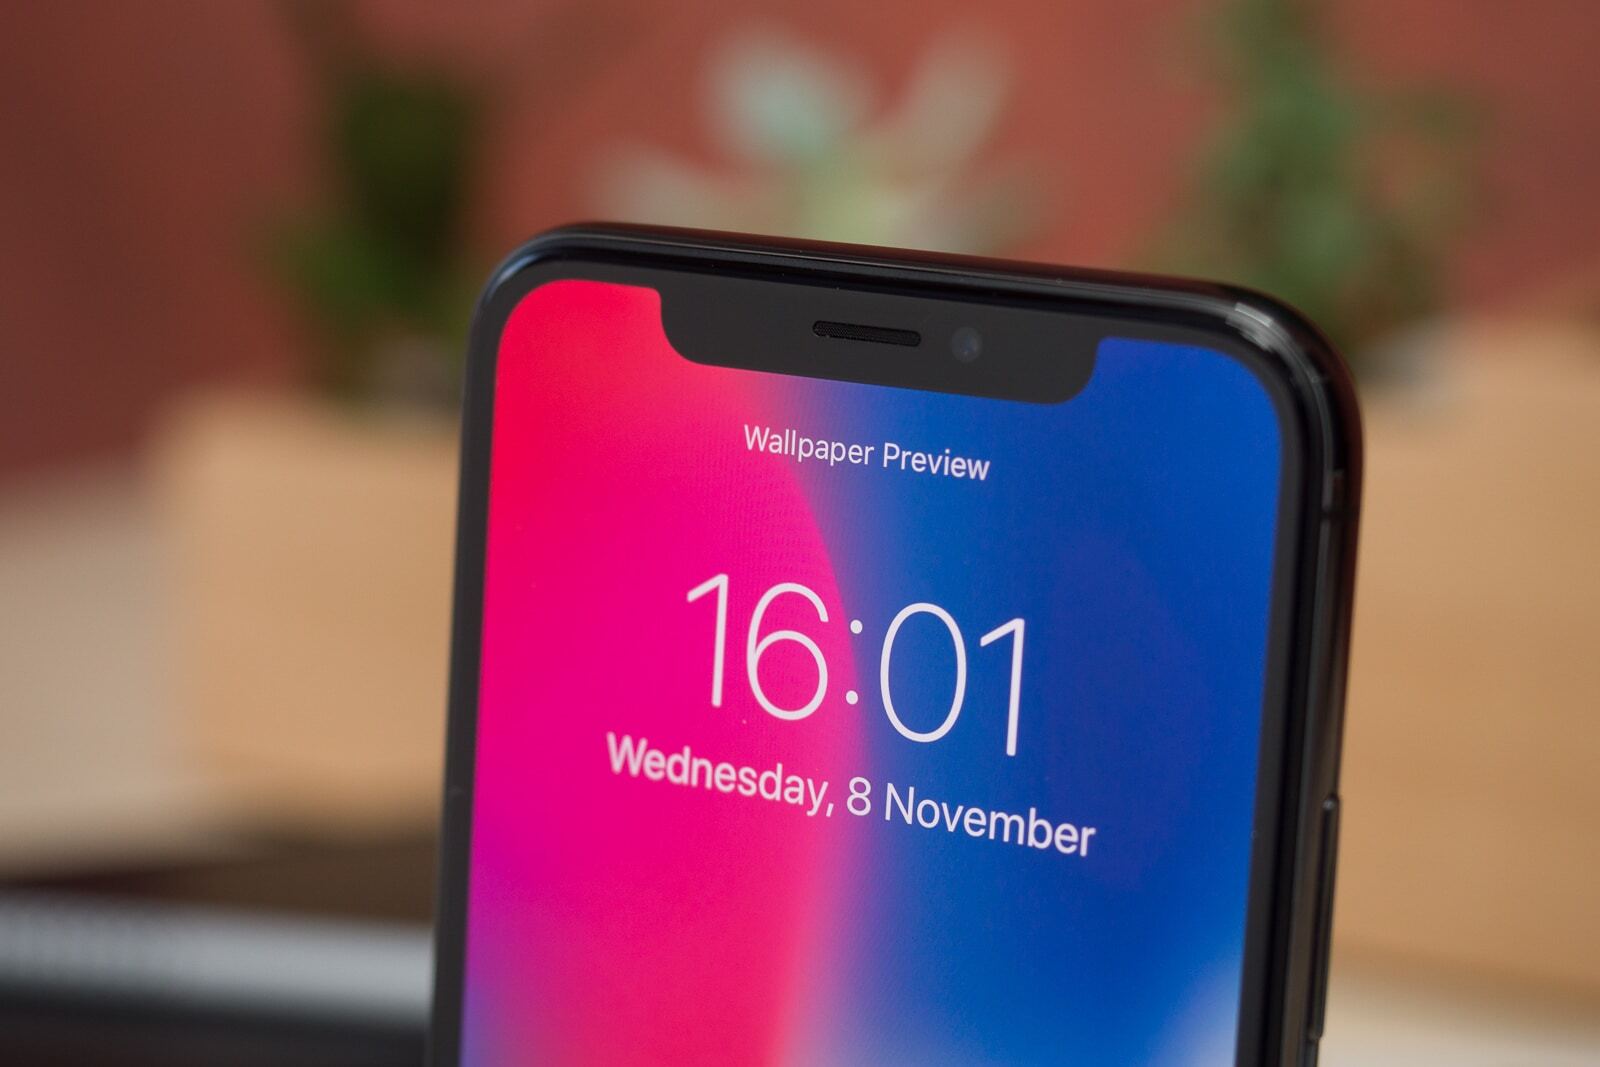 The iPhone X - iPhone 11 series to include new coprocessor dubbed Apple R1